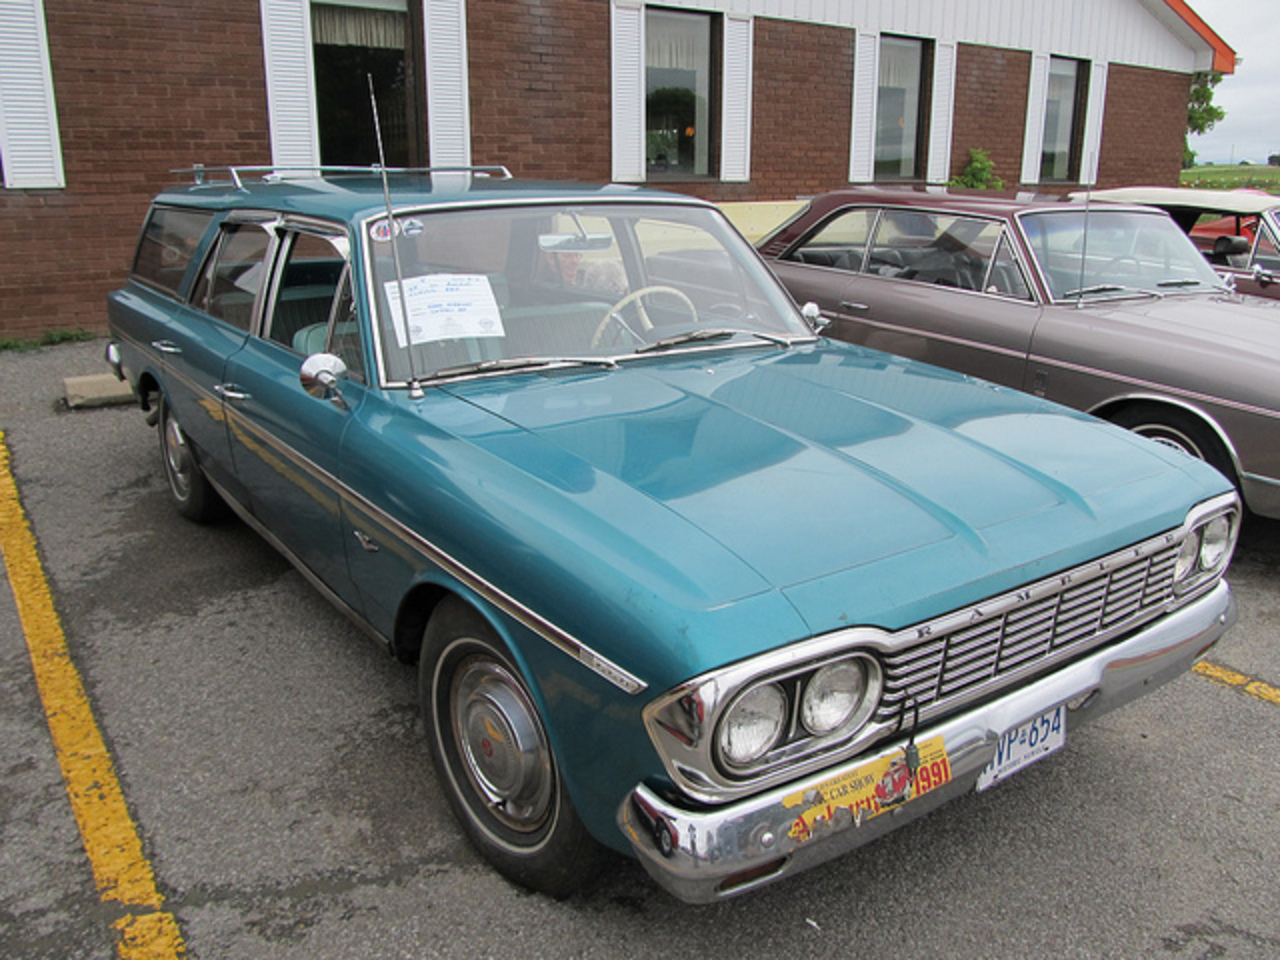 Manchester Ont,1964 Rambler Classic 660 wagon. | Flickr - Photo ...